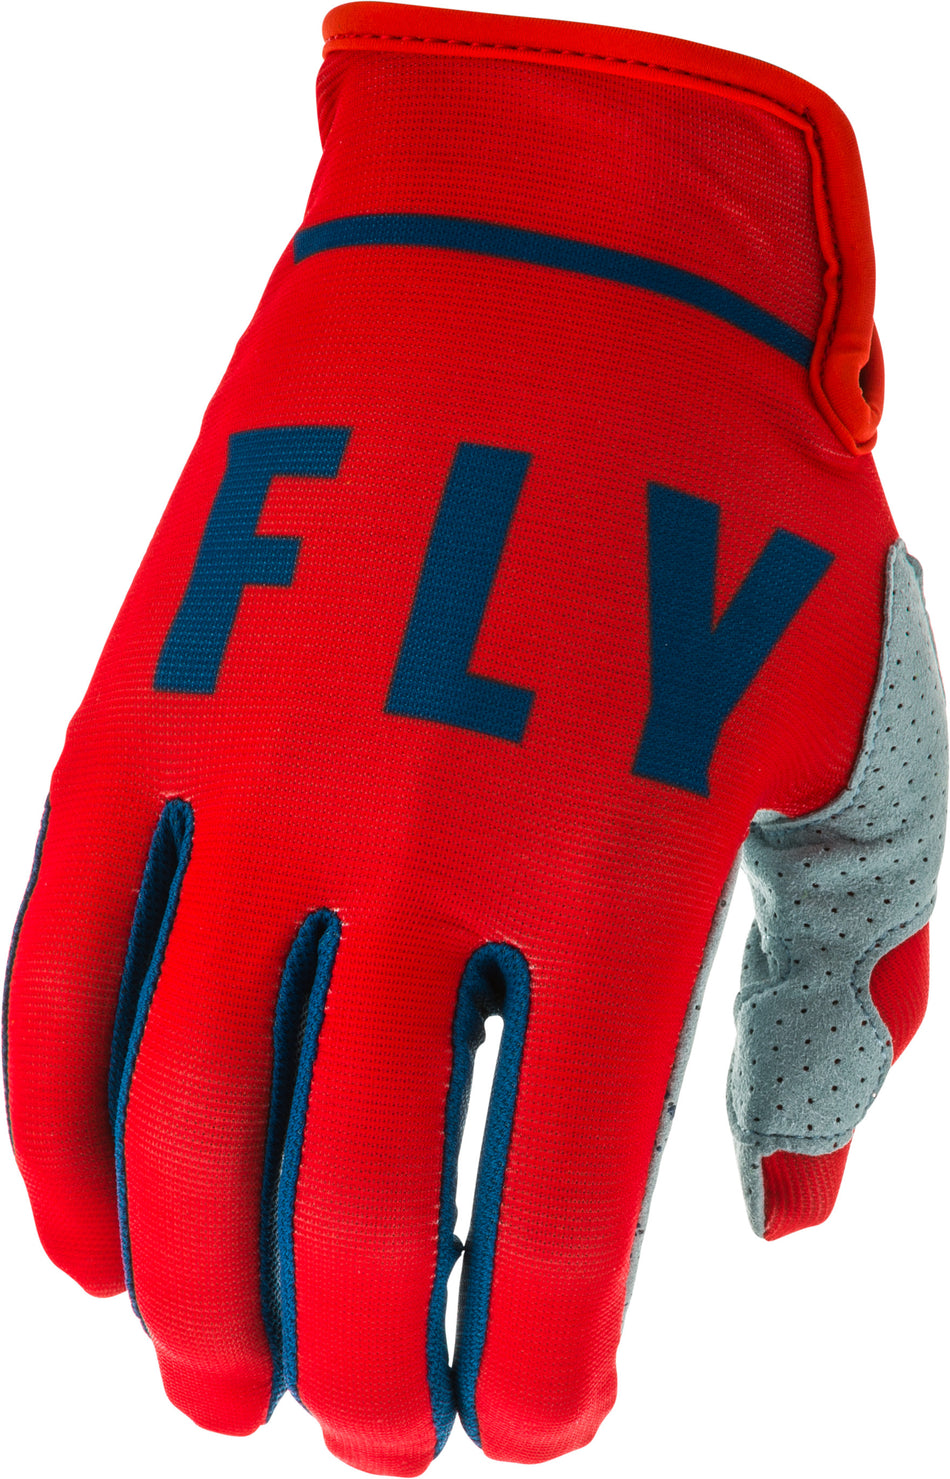 FLY RACING Lite Gloves Red/Slate/Navy Sz 13 373-71213